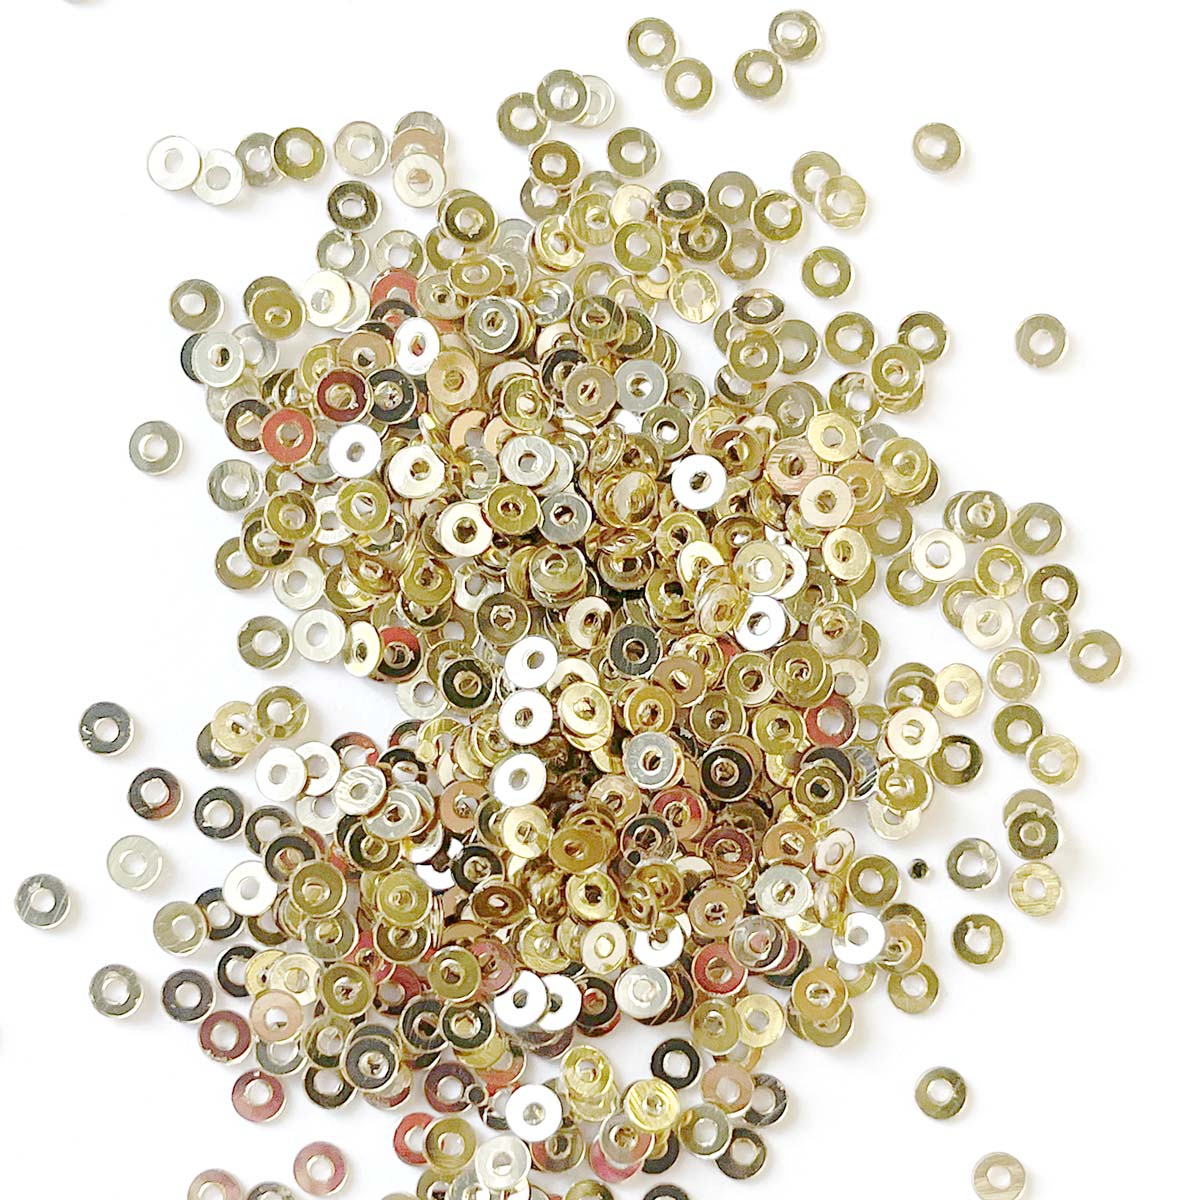 www.colourstreams.com.au Colour Streams Embroidery Stitching Embellishments Costumes Theatre Sequins Shiny Glitter Flat Circle Pale Bronze Gold 3mm S231